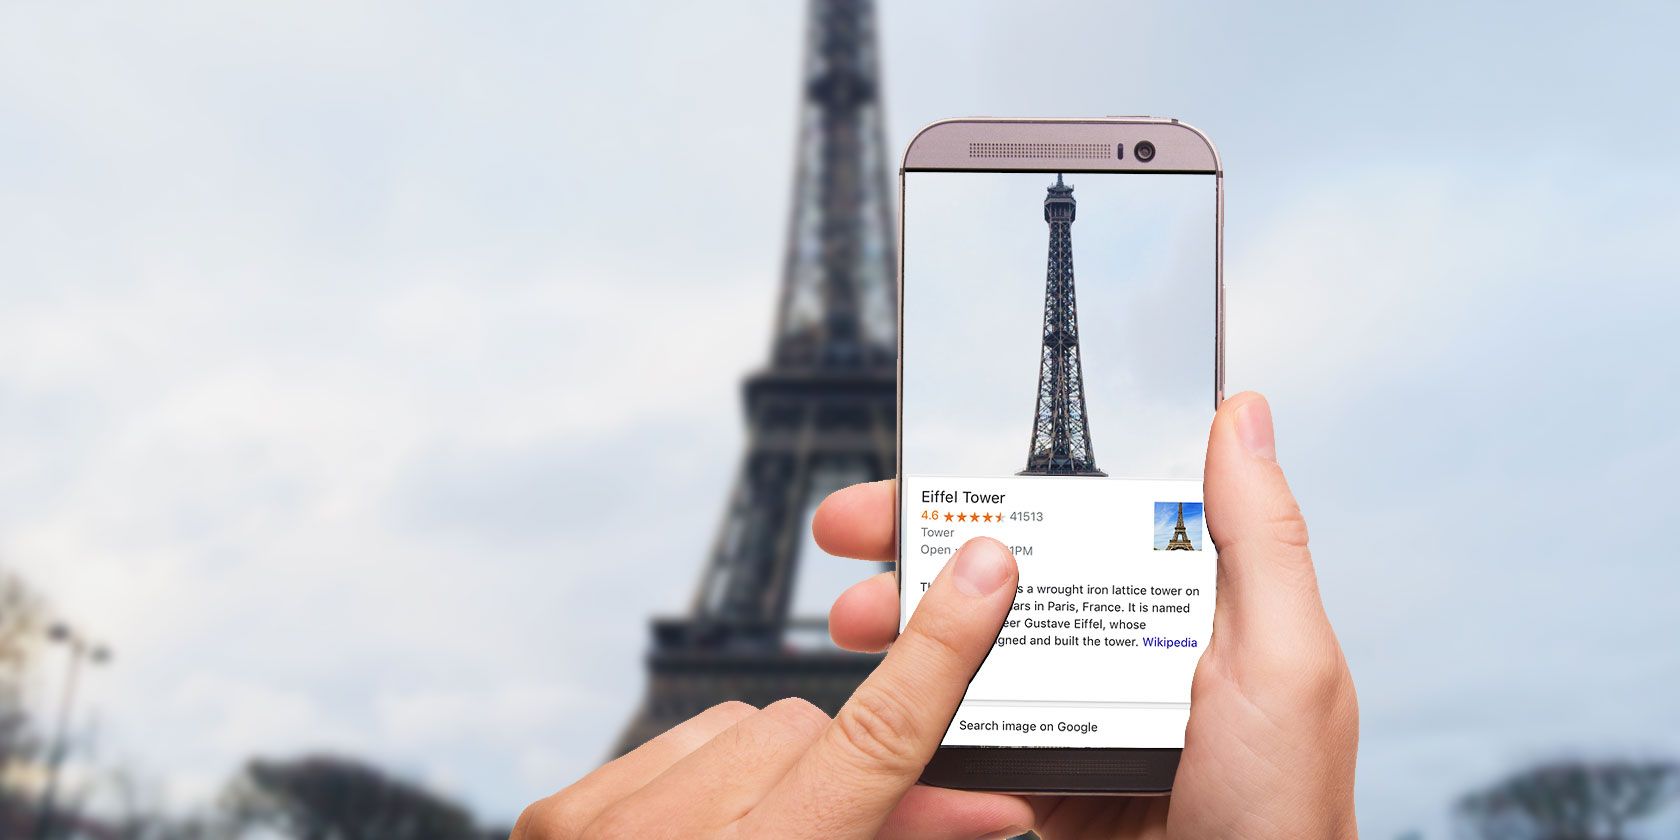 Google Lens being used to detect the Eiffel Tower.